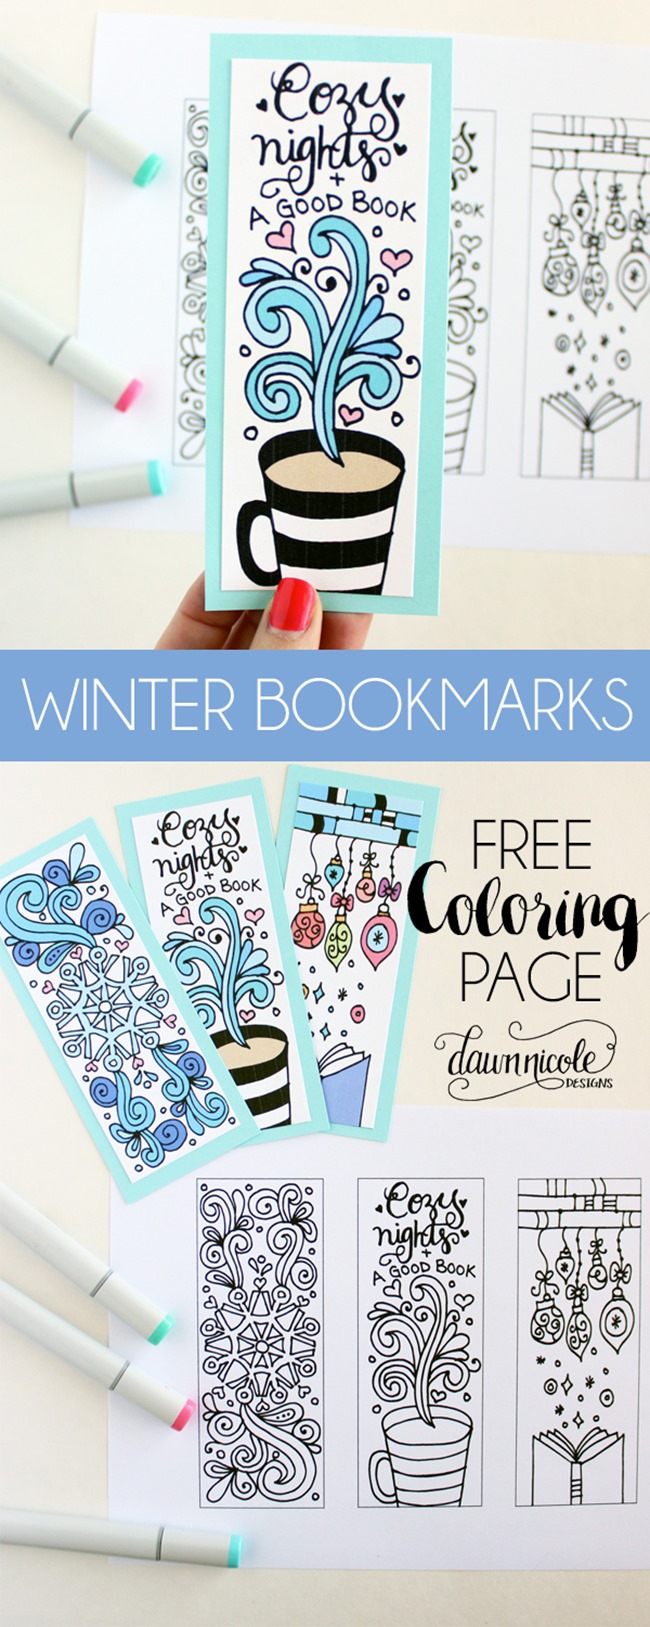 Christmas Printable Coloring Page - Winter bookmarks